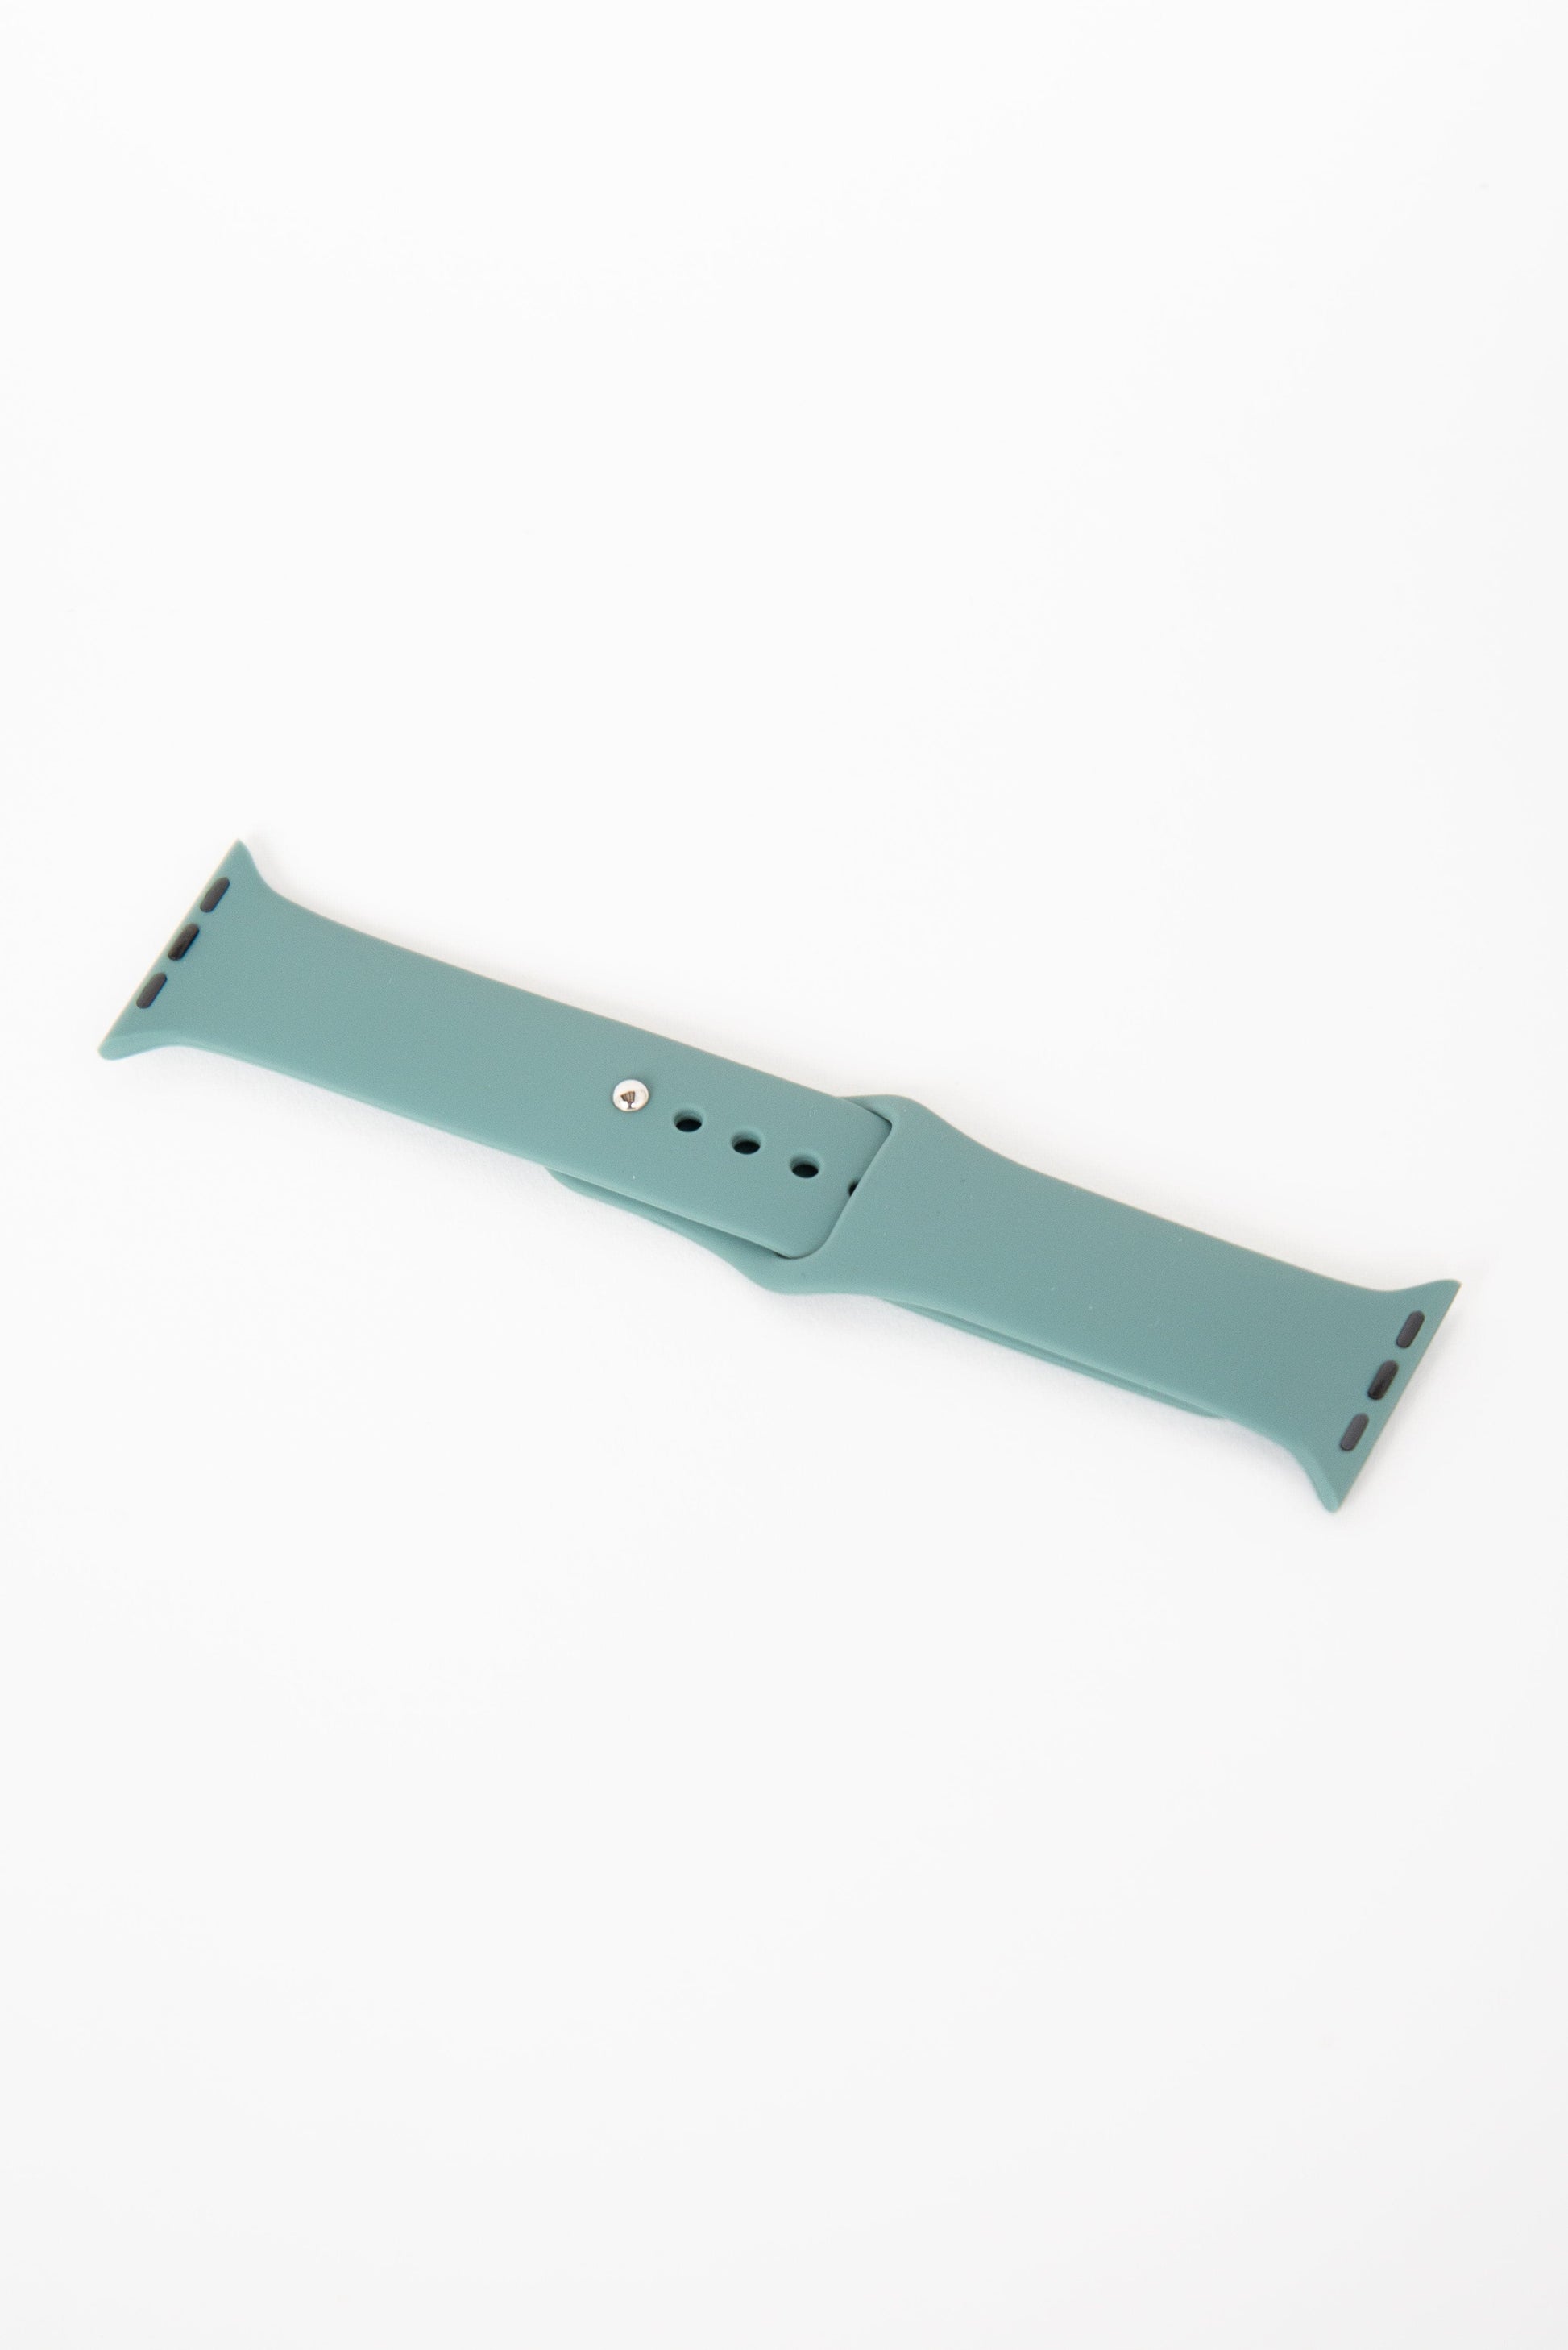 Favorite Watch Band Watch Band A.N.Enterprises Dusty Teal OS 